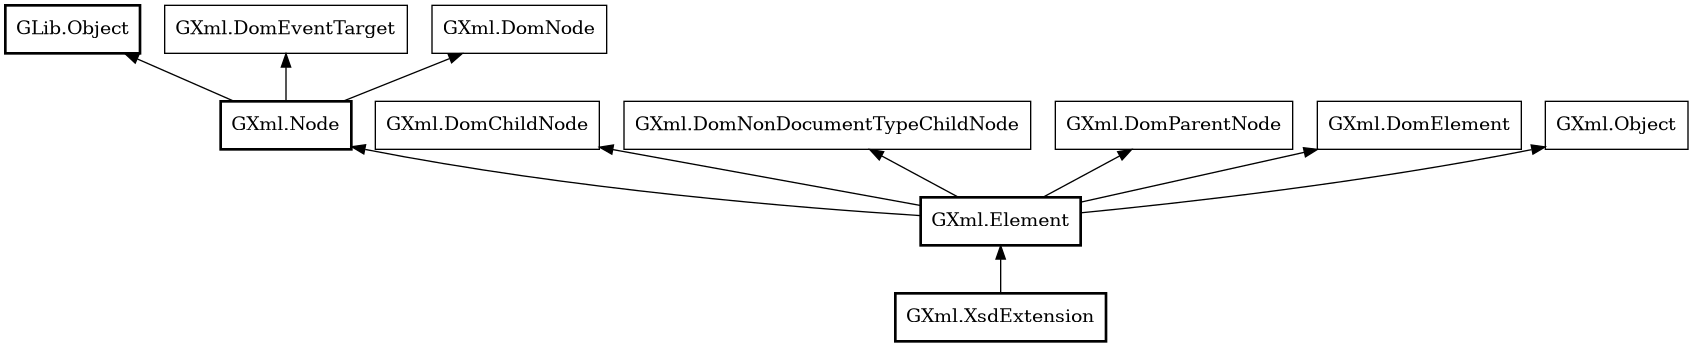 Object hierarchy for XsdExtension